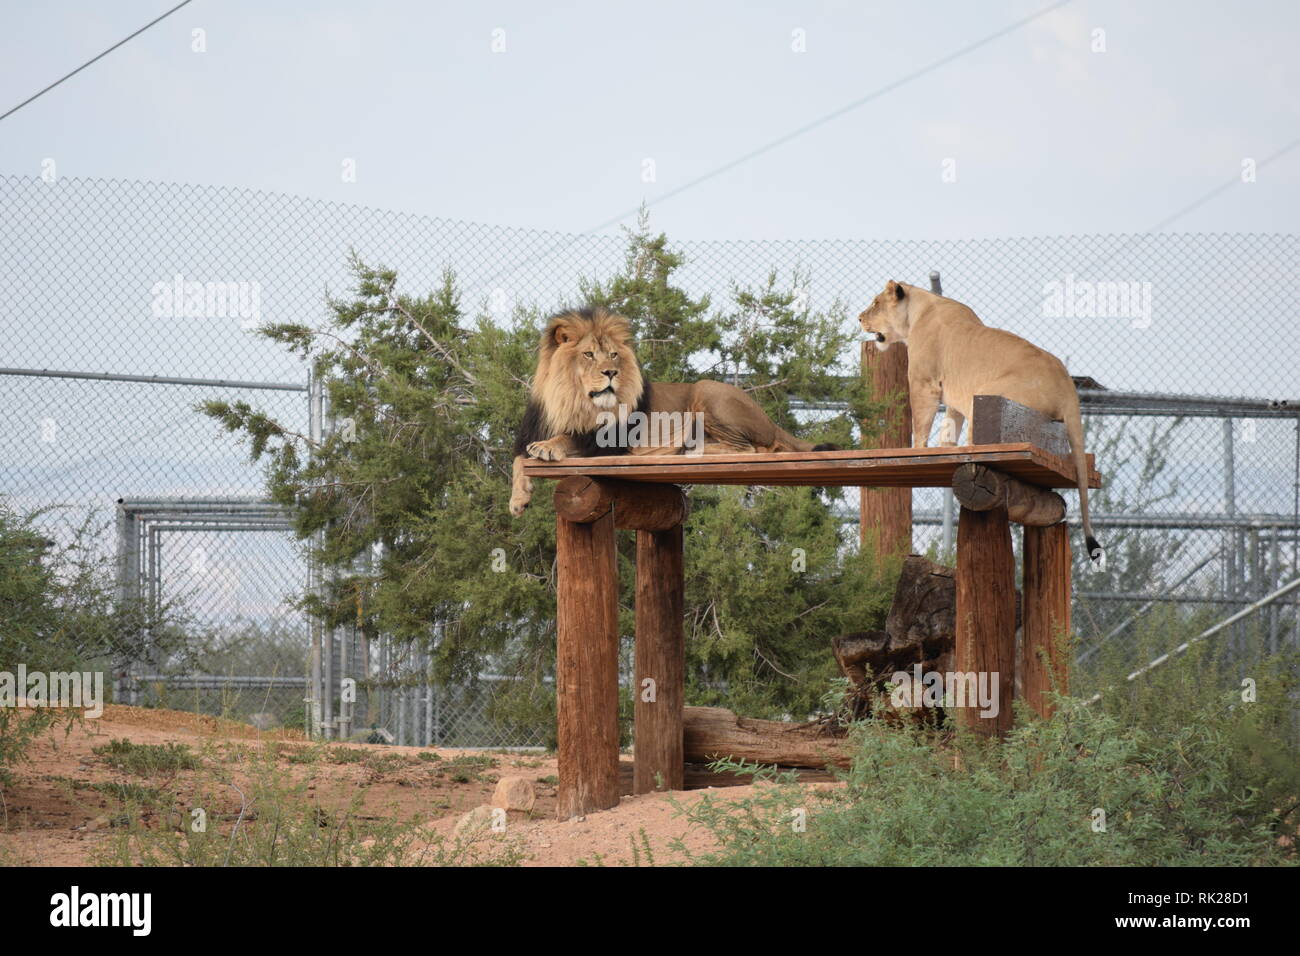 Lions and lionesses at the Out of Africa sanctuary in Arizona Stock Photo